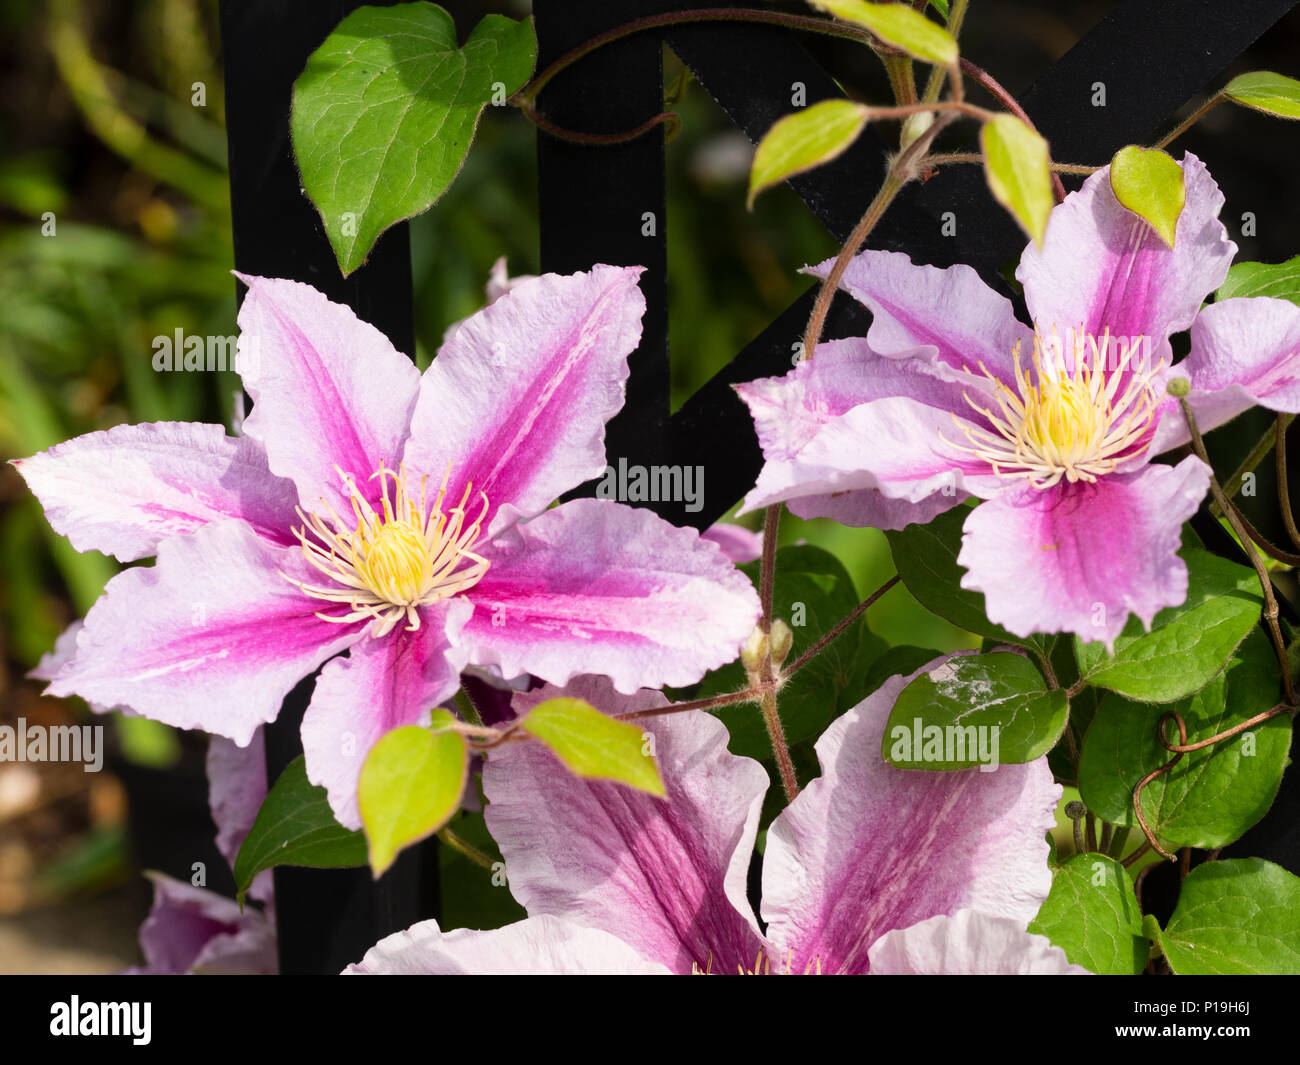 Early summer pale pink, dark pink barred single flowers of the hardy climber, Clematis 'Pulu' Stock Photo